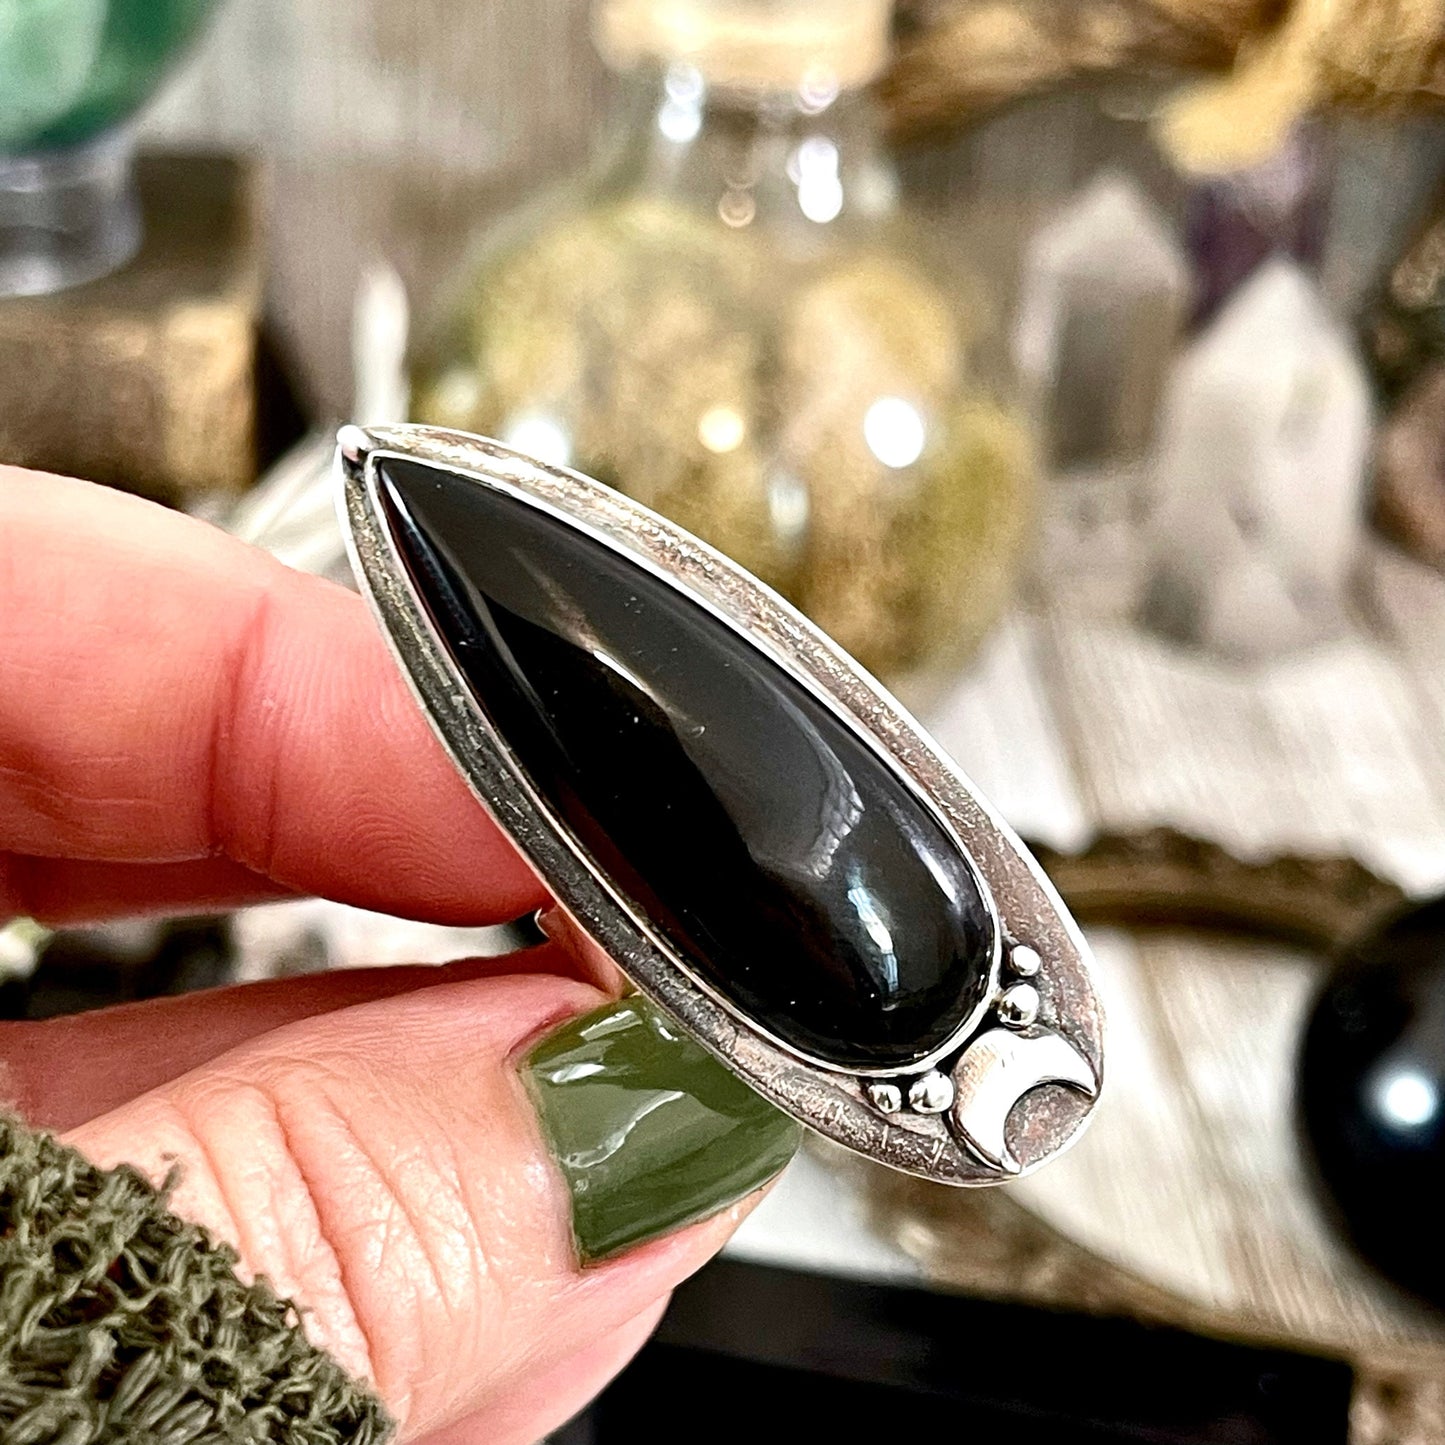 Big Crystal Ring, Black Crystal Ring, Black Onyx Ring, Black Stone Ring, Bohemian Jewelry, Bohemian Ring, Dark Witchy Jewelry, Etsy ID: 1088283866, Foxlark Alchemy, FOXLARK- RINGS, Goth Jewelry, Jewelry, Moon Jewelry, Moon Ring, Rings, Statement Rings, St